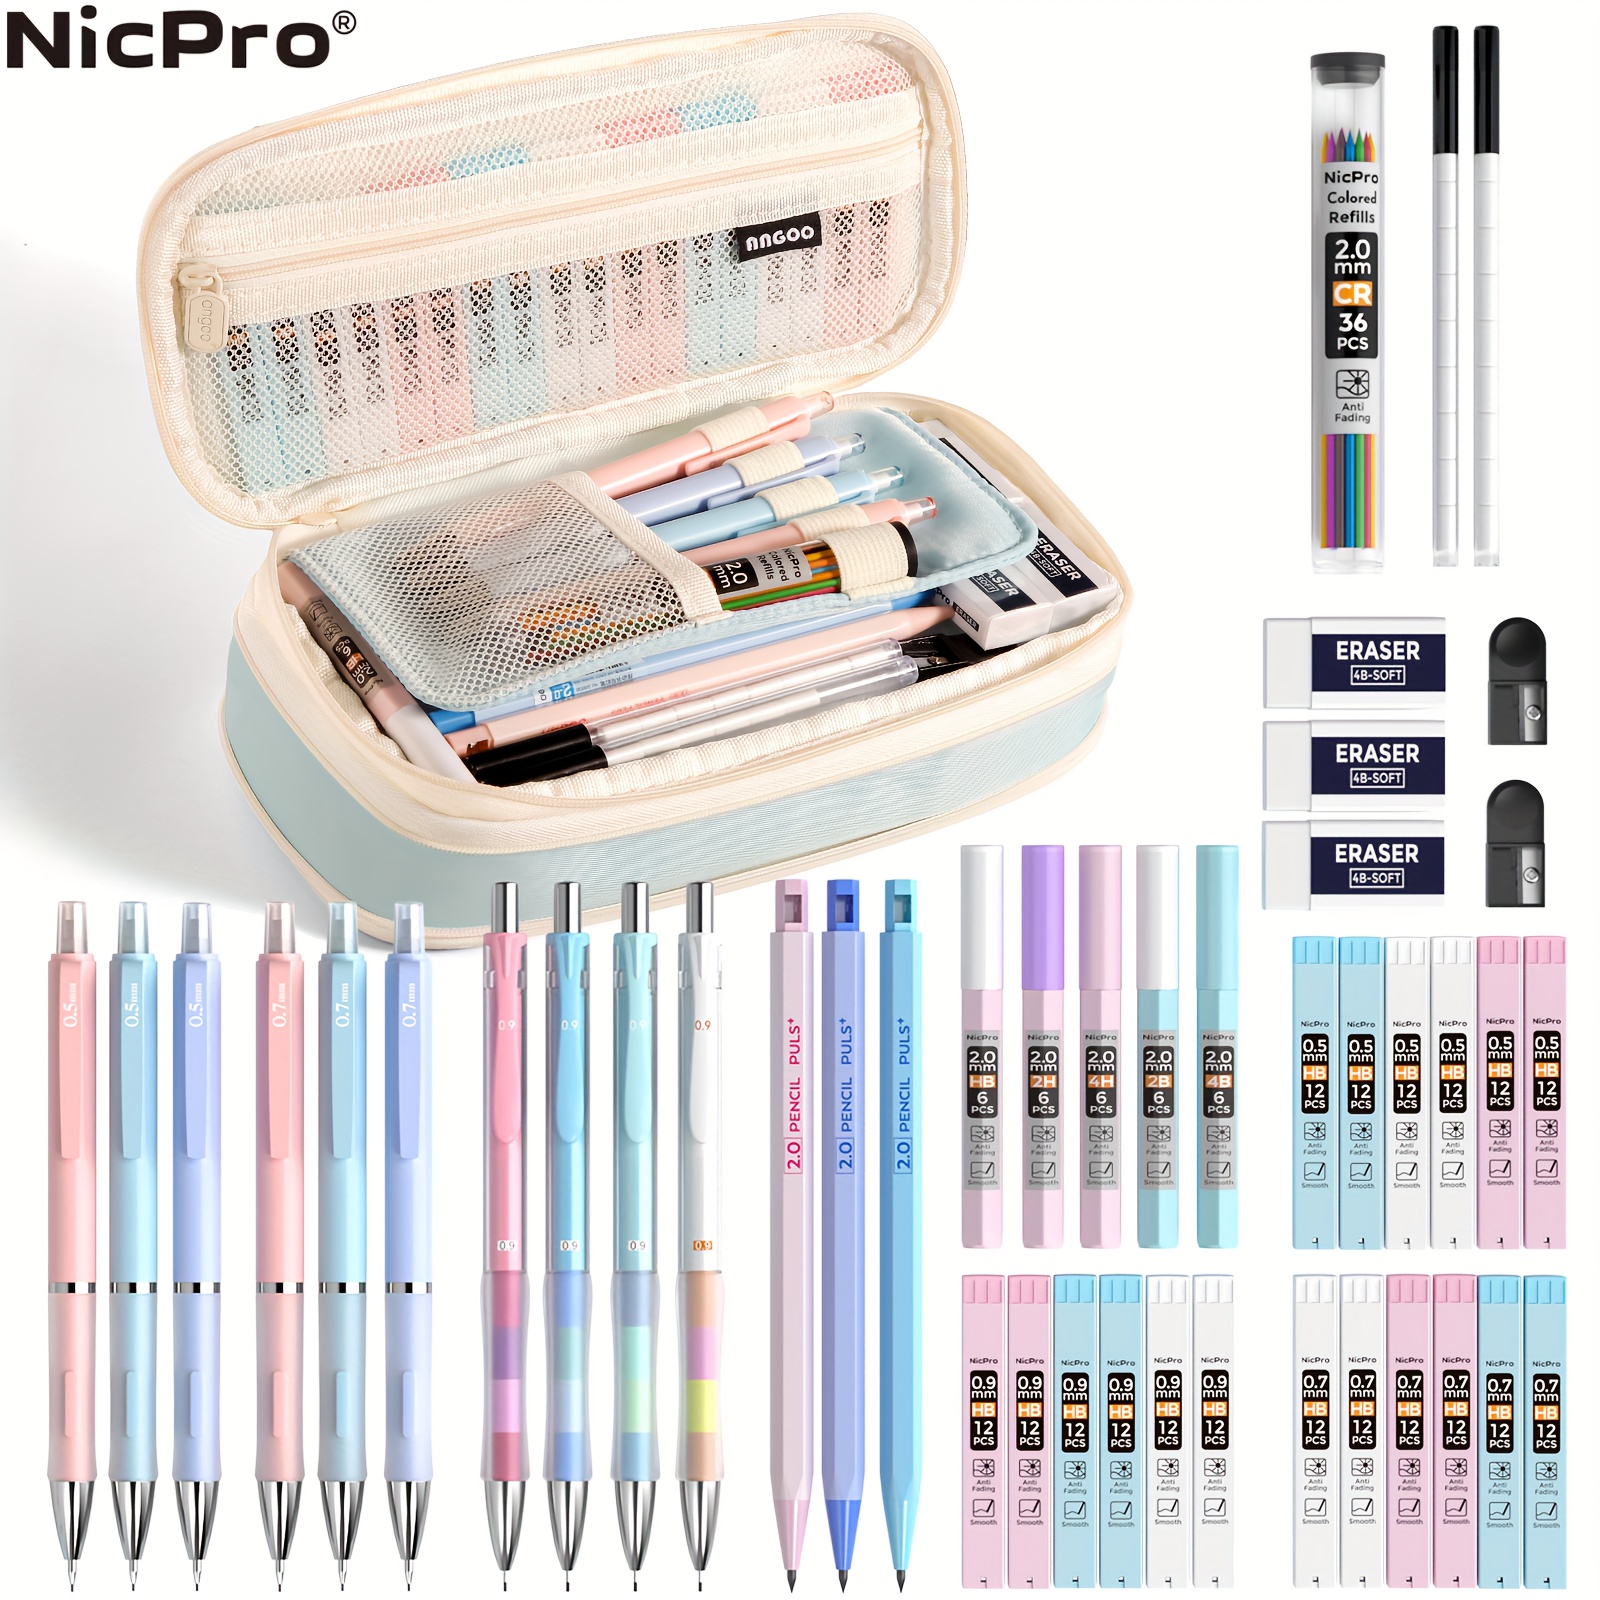 

Nicpro 45pcs Aesthetic School Supplies With Big Capacity Pen Case, Pastel Mechanical Pencils 0.5, 0.7, 0.9, 2mm With 24 Tube Lead Refills (4b 2b Hb 2h 4h Colors) Erasers For Student Writing Drawing